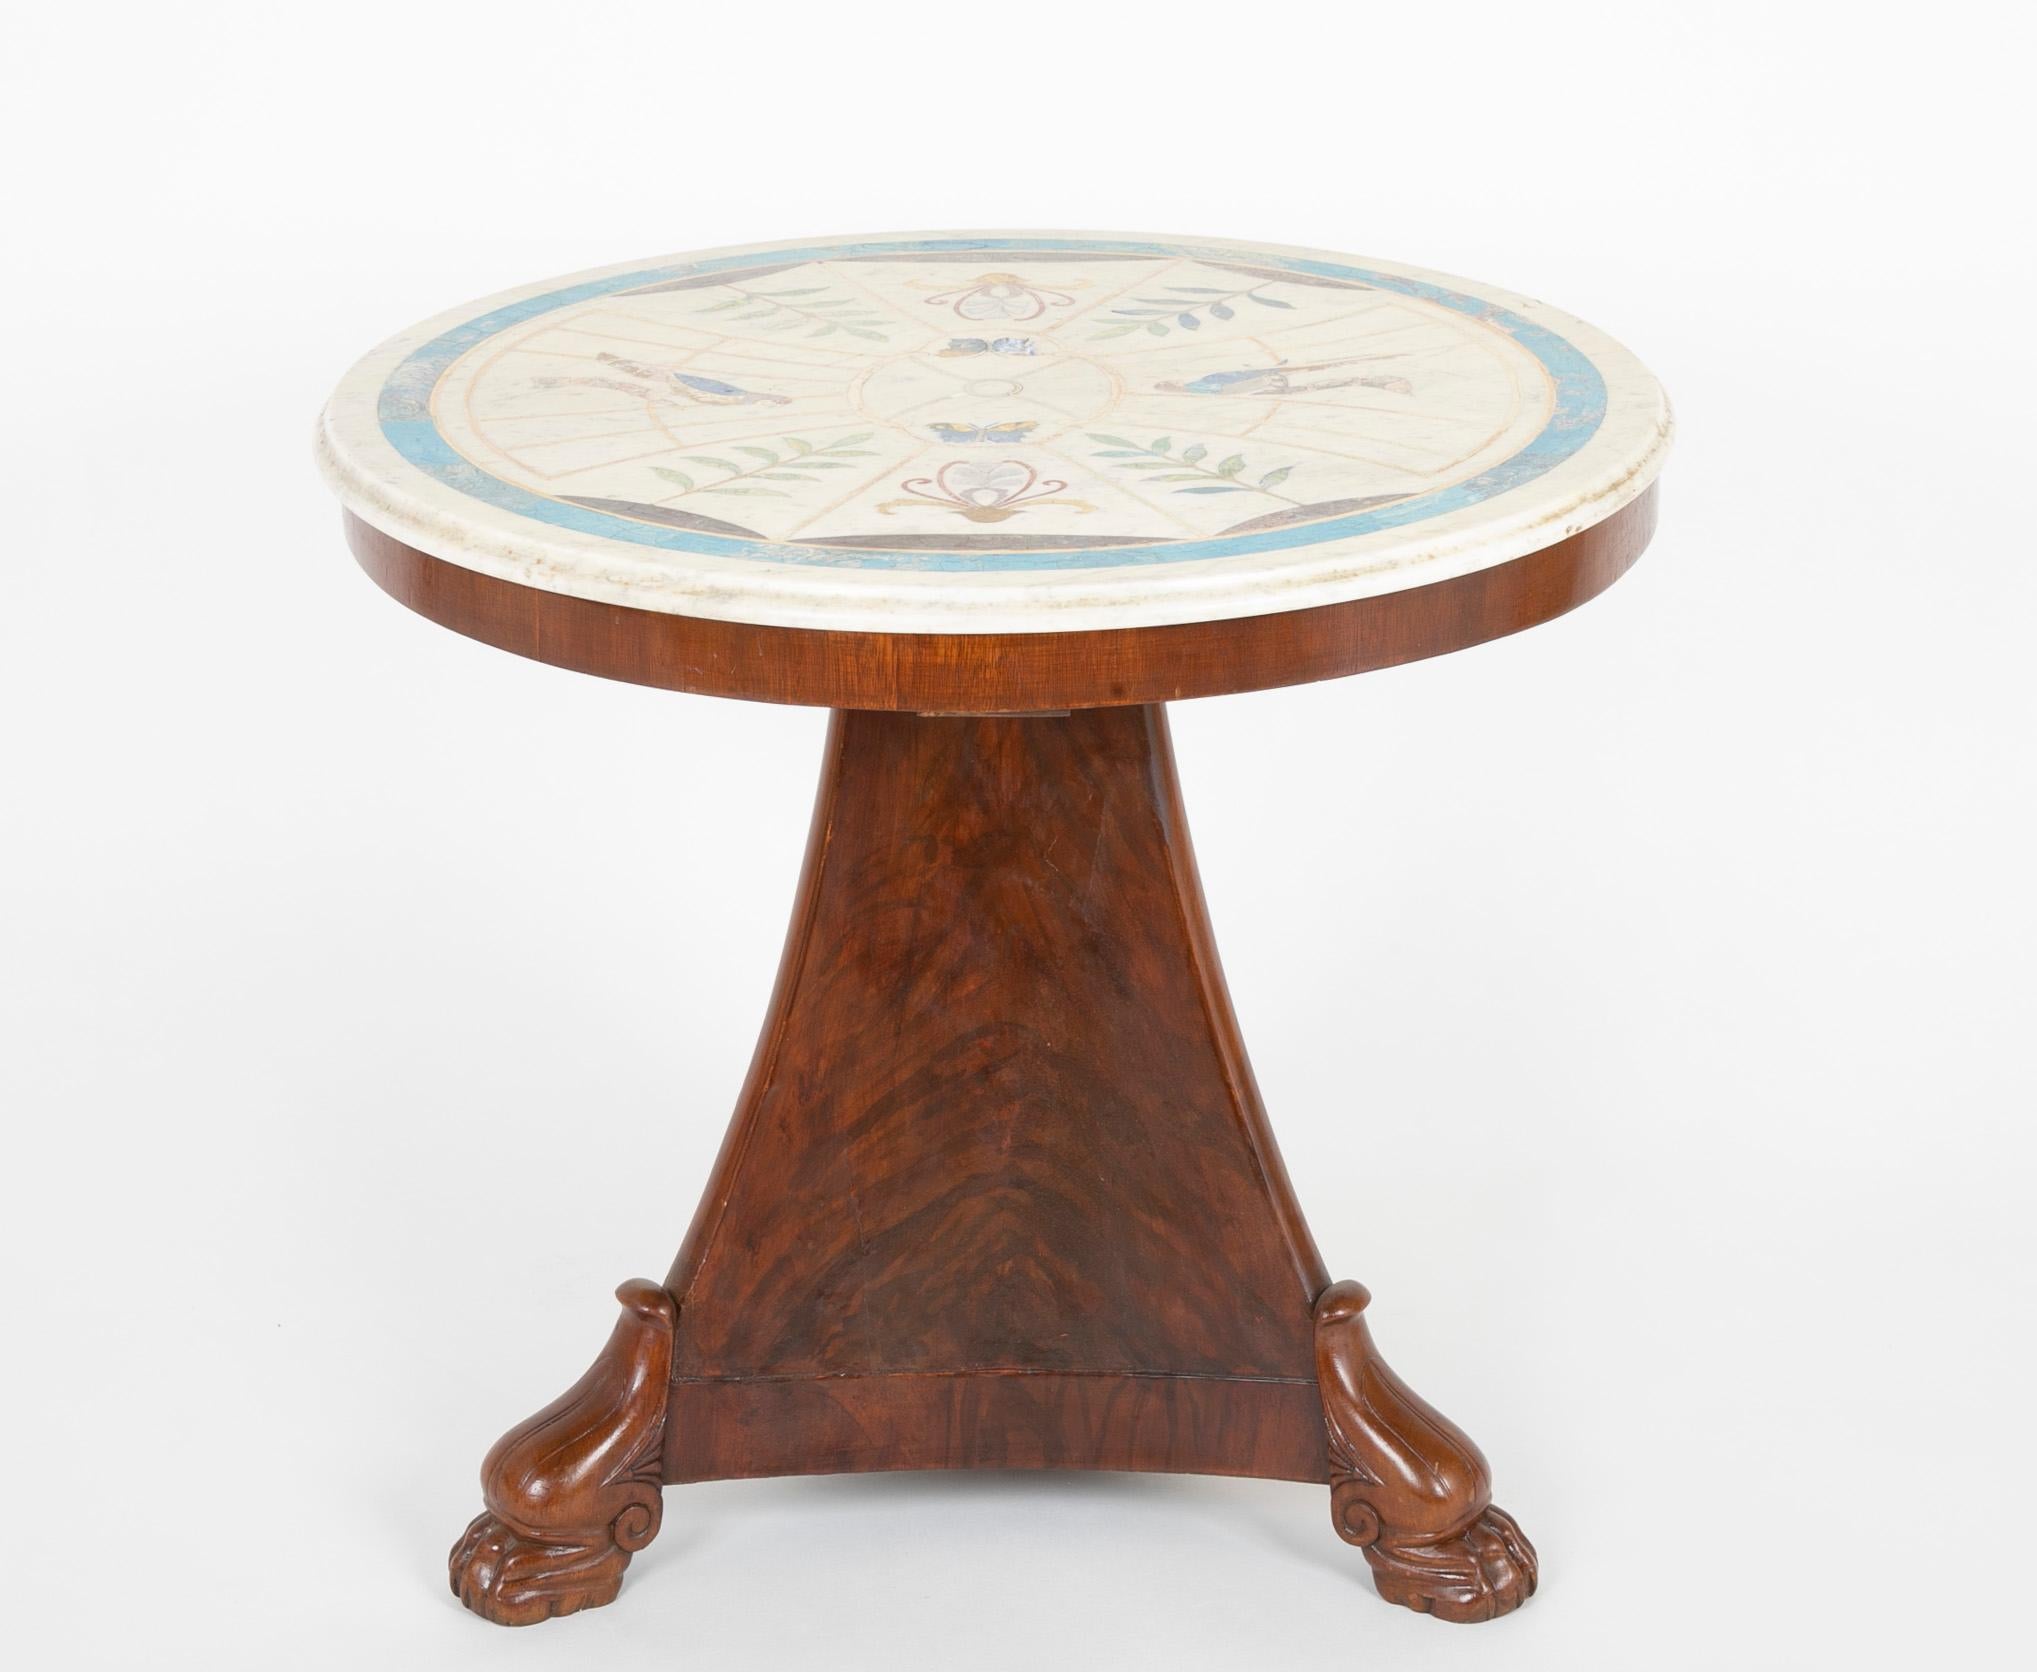 French Empire mahogany tripartite paw foot base table with rare Scagliola marble top, circa 1820s.